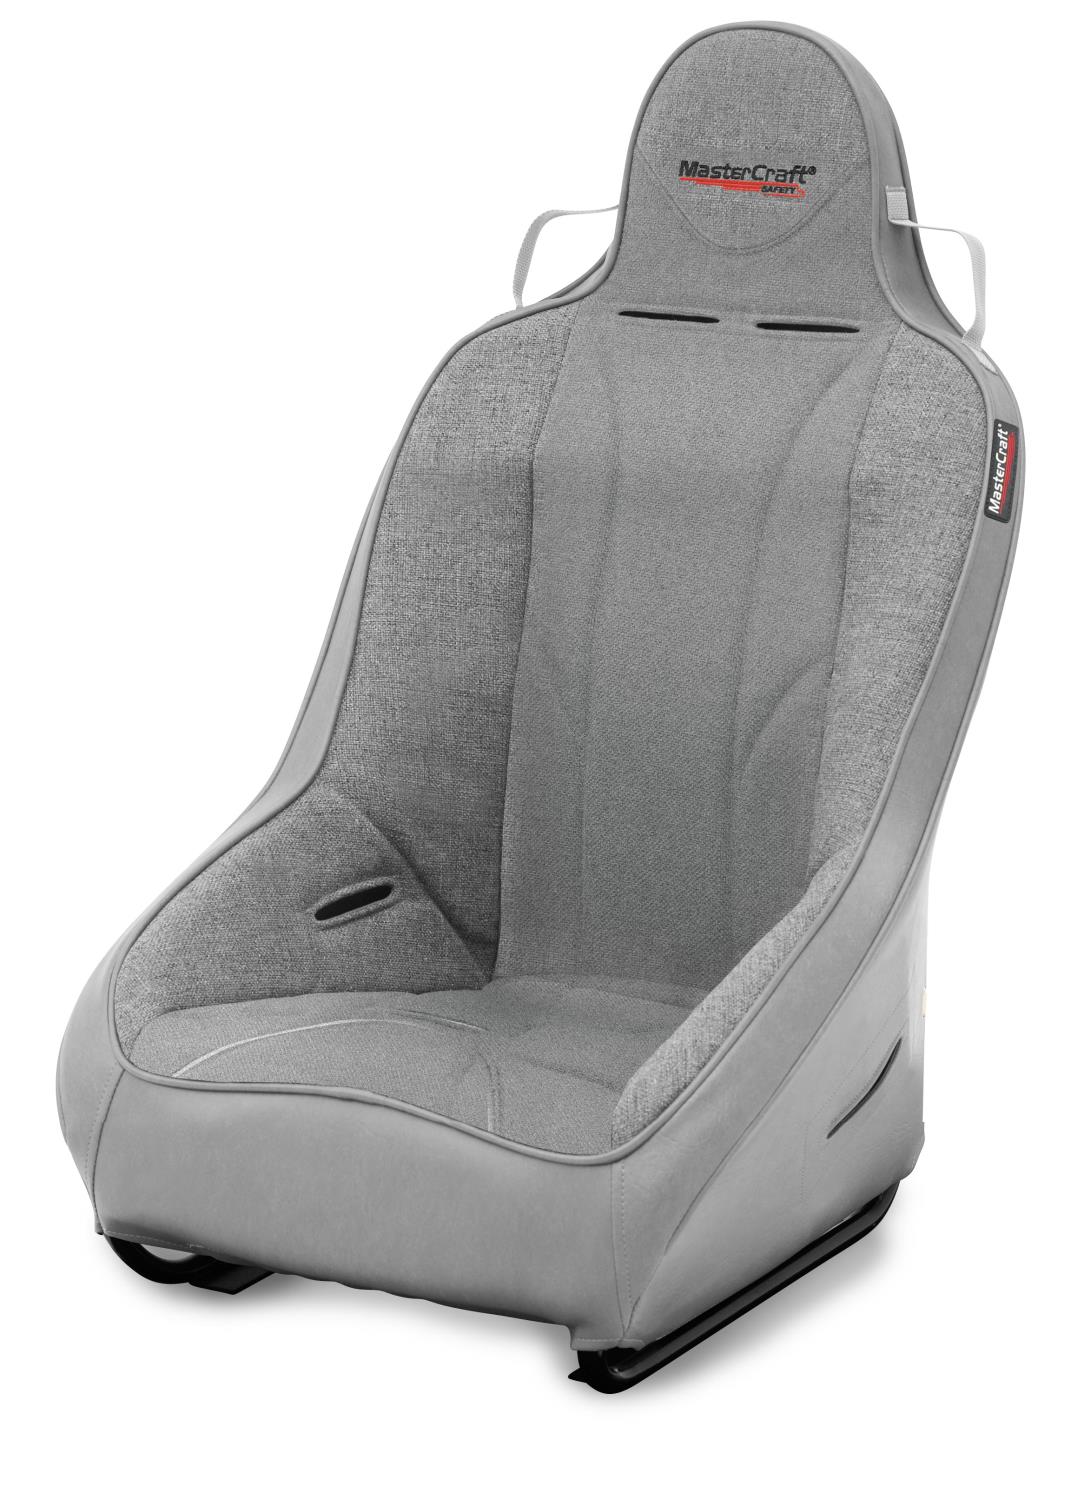 560219 2 in. WIDER PROSeat w/Fixed Headrest, Smoke Gray with Heather Gray Fabric Center and Side Panels